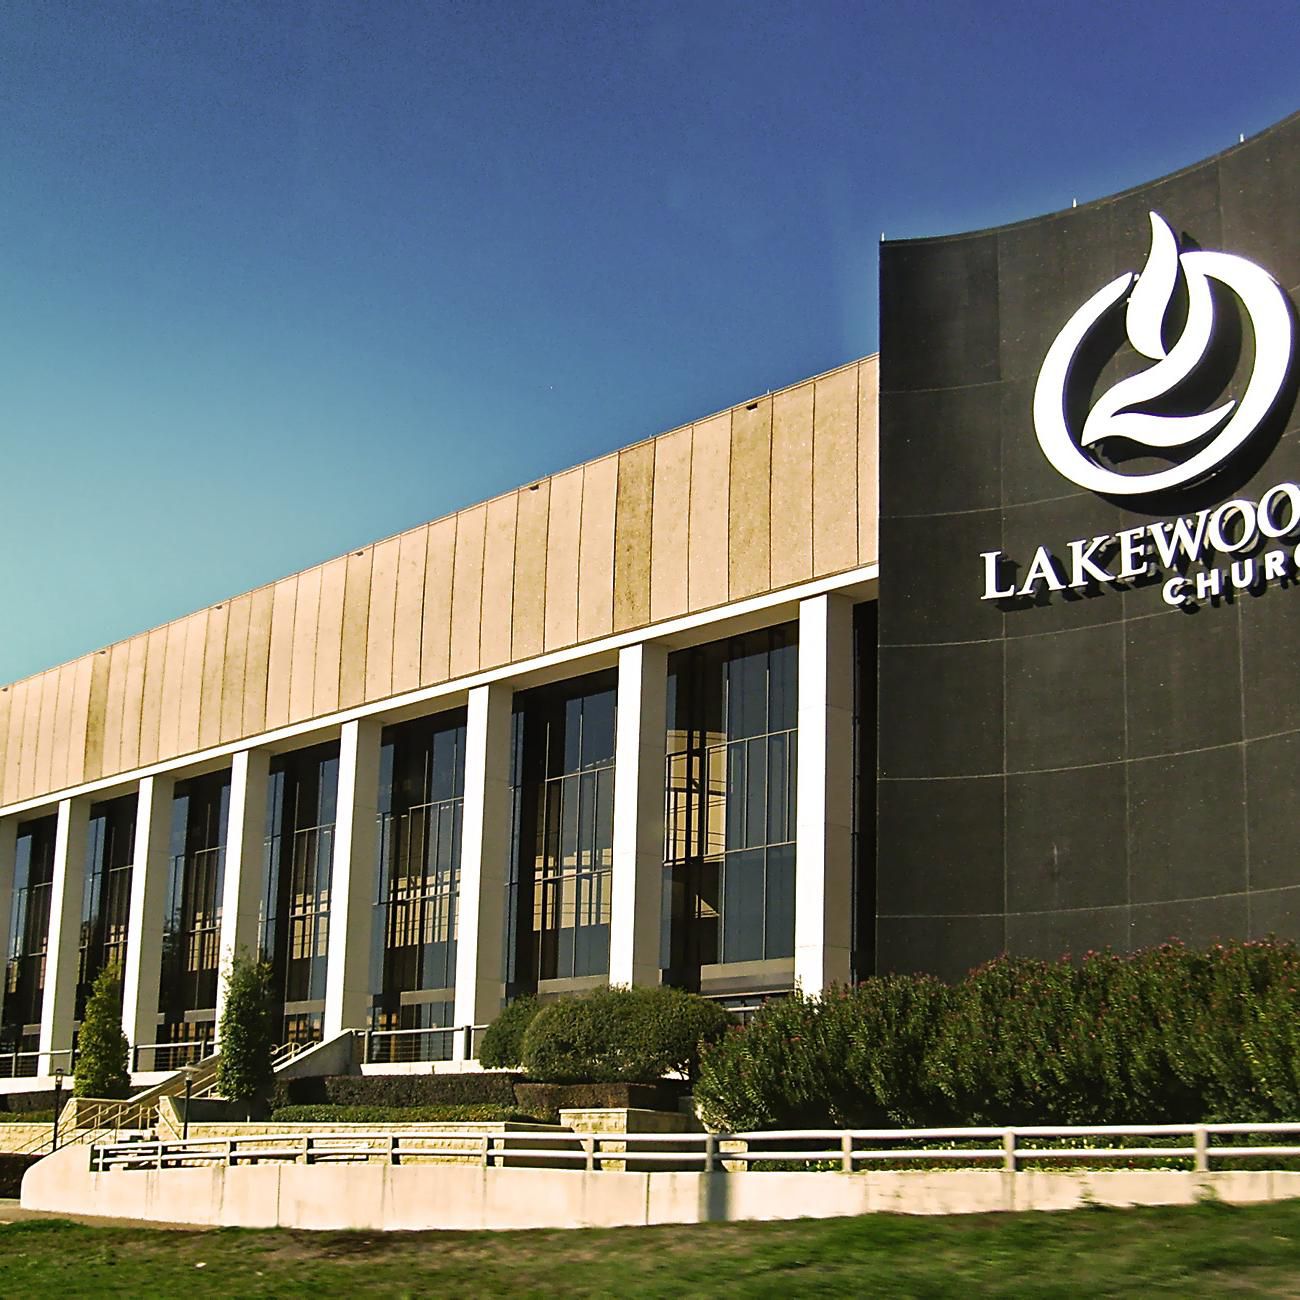 Lakewood Church is located just a mile from the hotel.